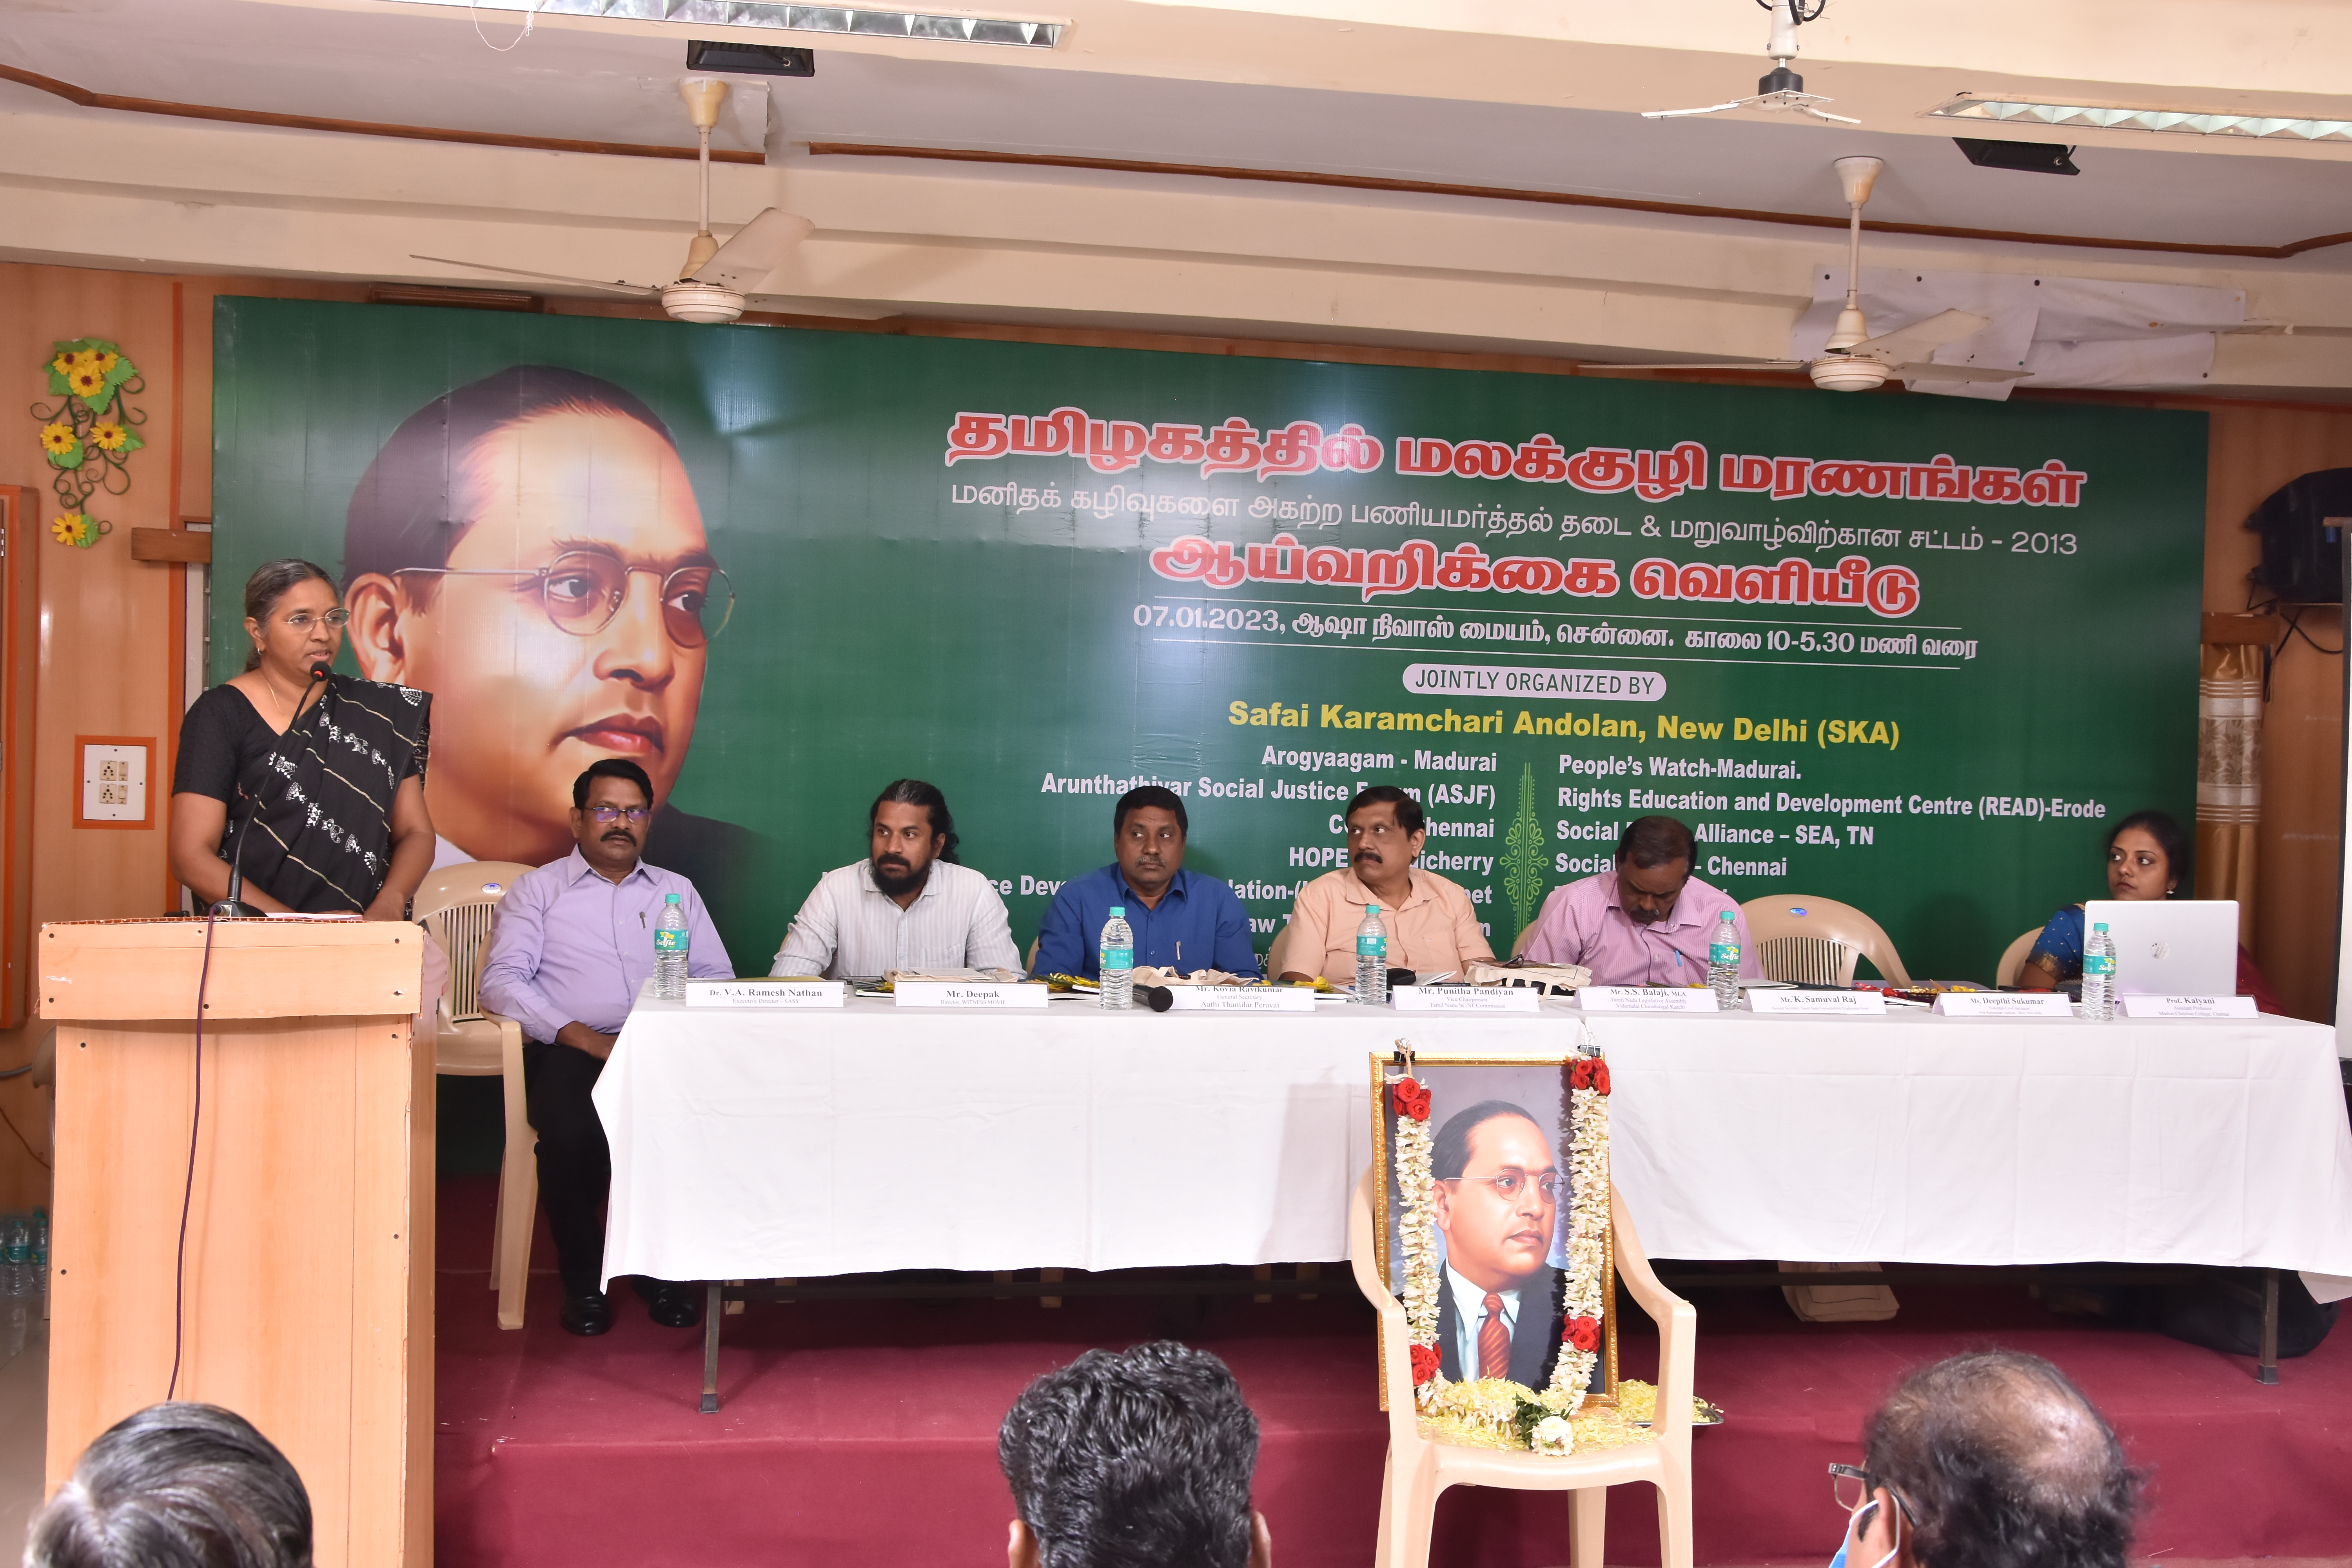 State Level Consultation & Release of the Study Report on the Status of the implementation of The Prohibition of Employment as Manual Scavengers and their Rehabilitation Act, 2013 in Tamil Nadu